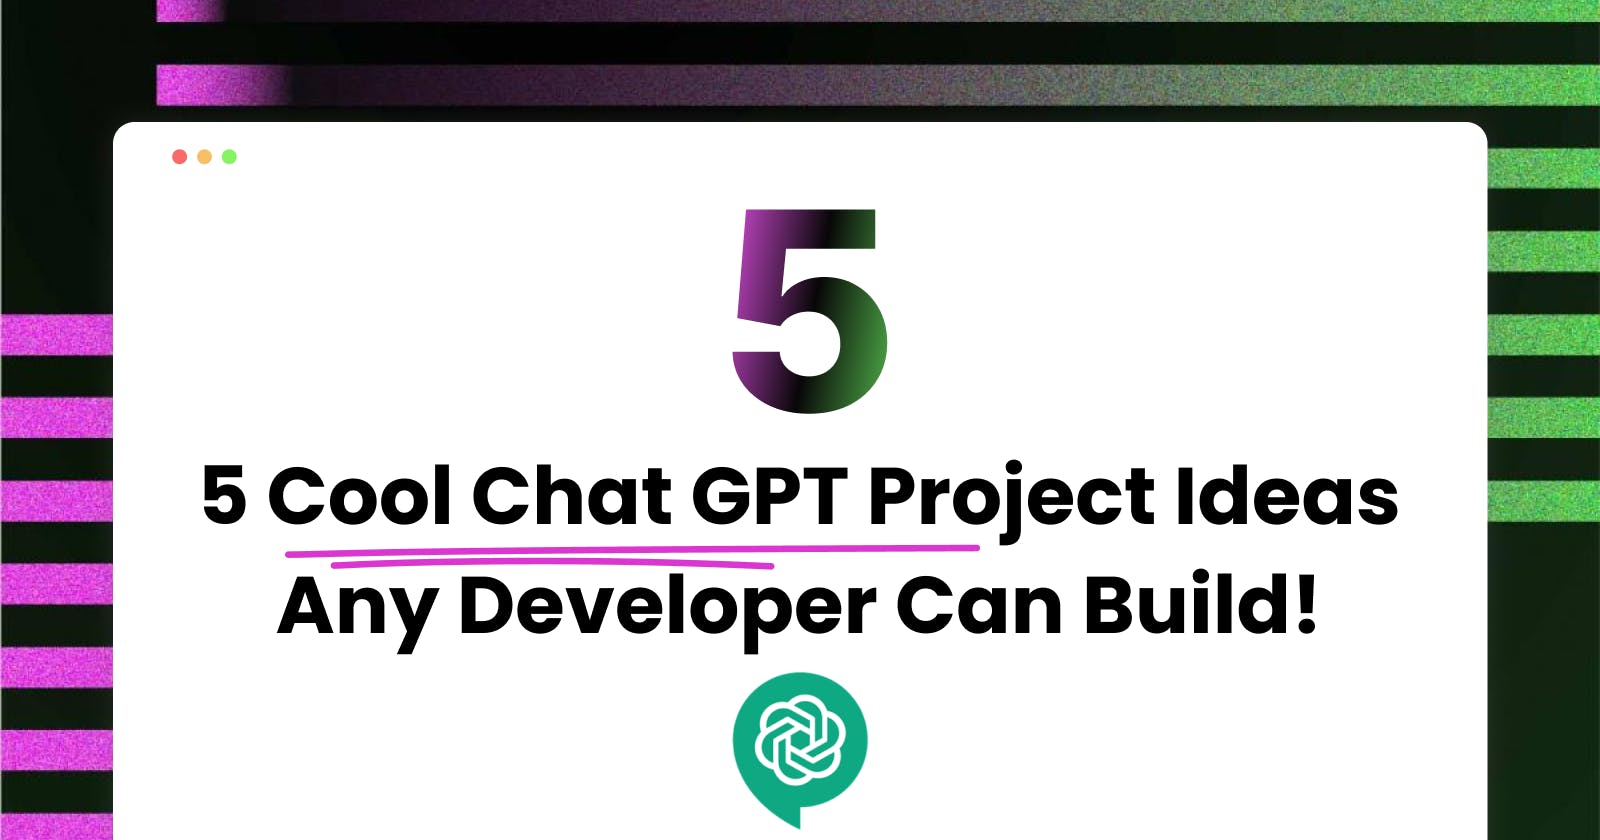 5 Cool Chat GPT Project Ideas Any Developer Can Build!